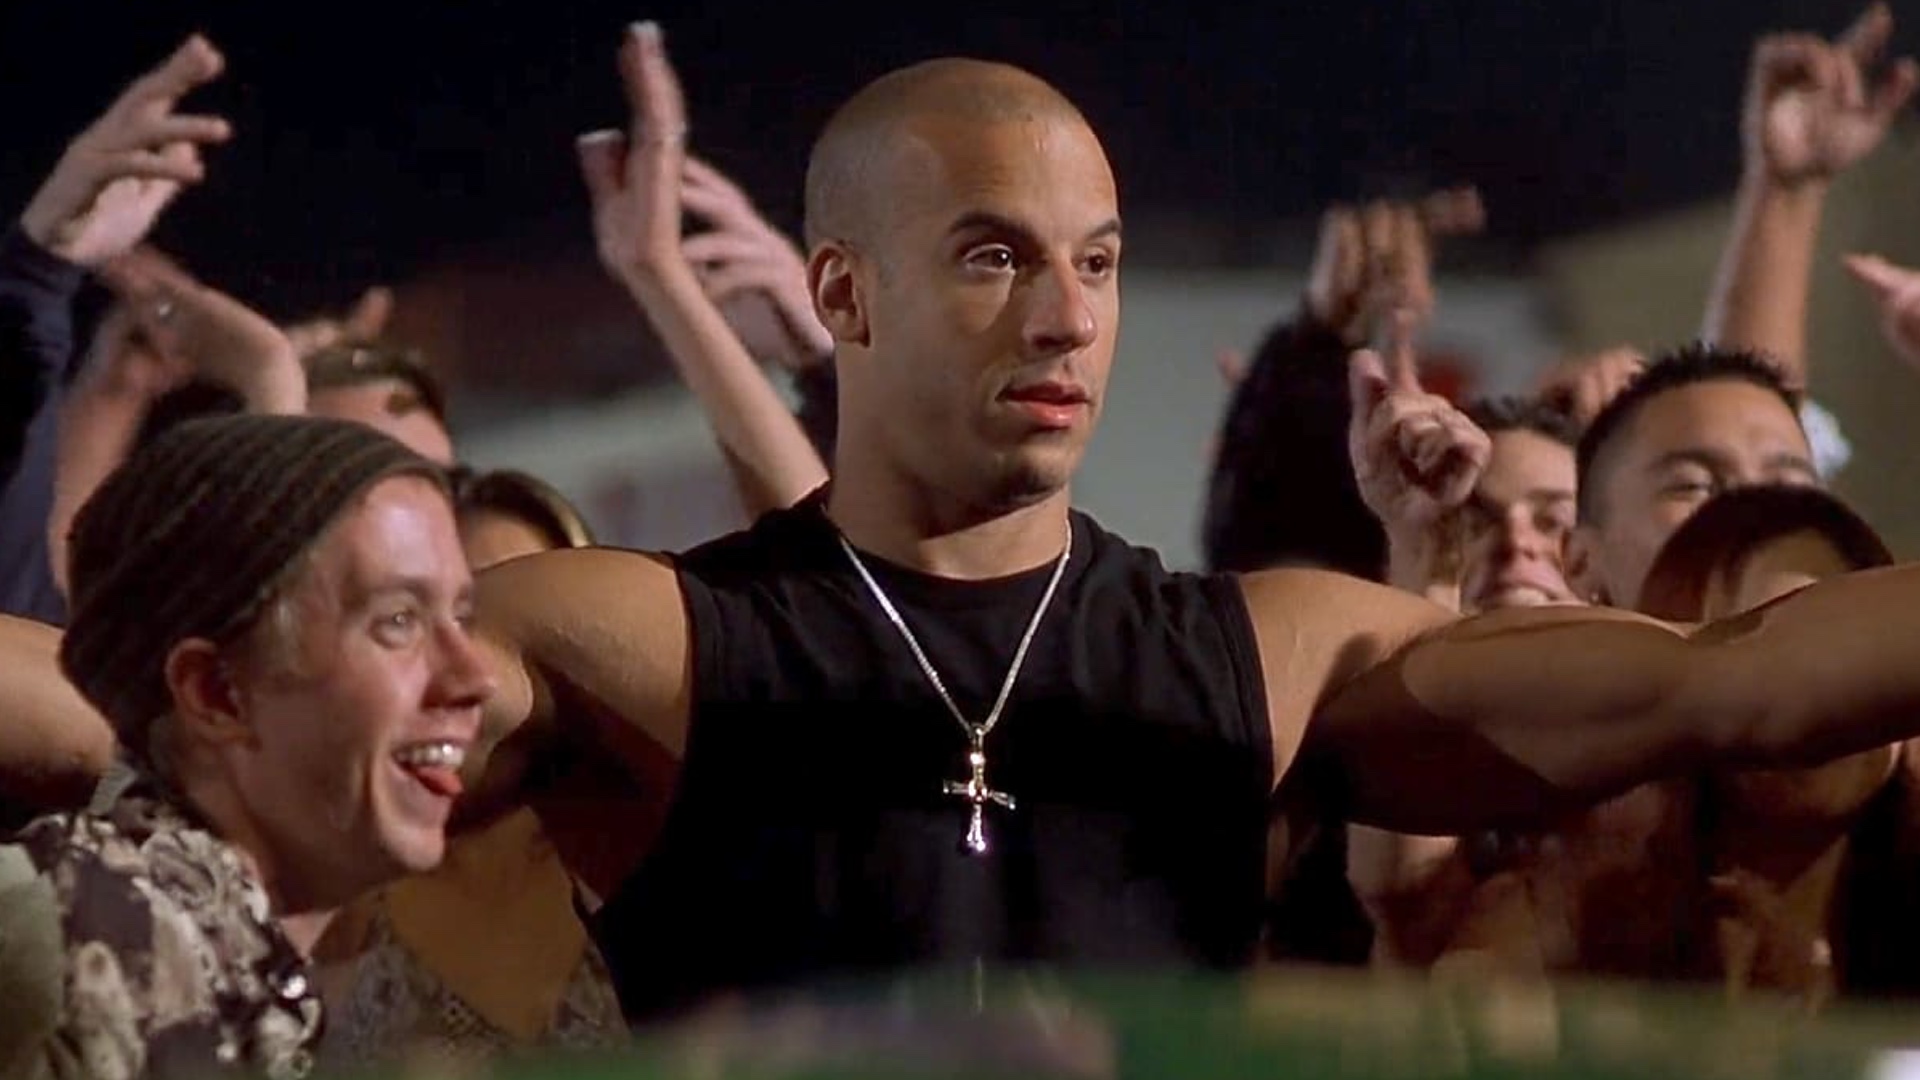 First fast and furious director rob cohen wants to direct the franchises final movie â